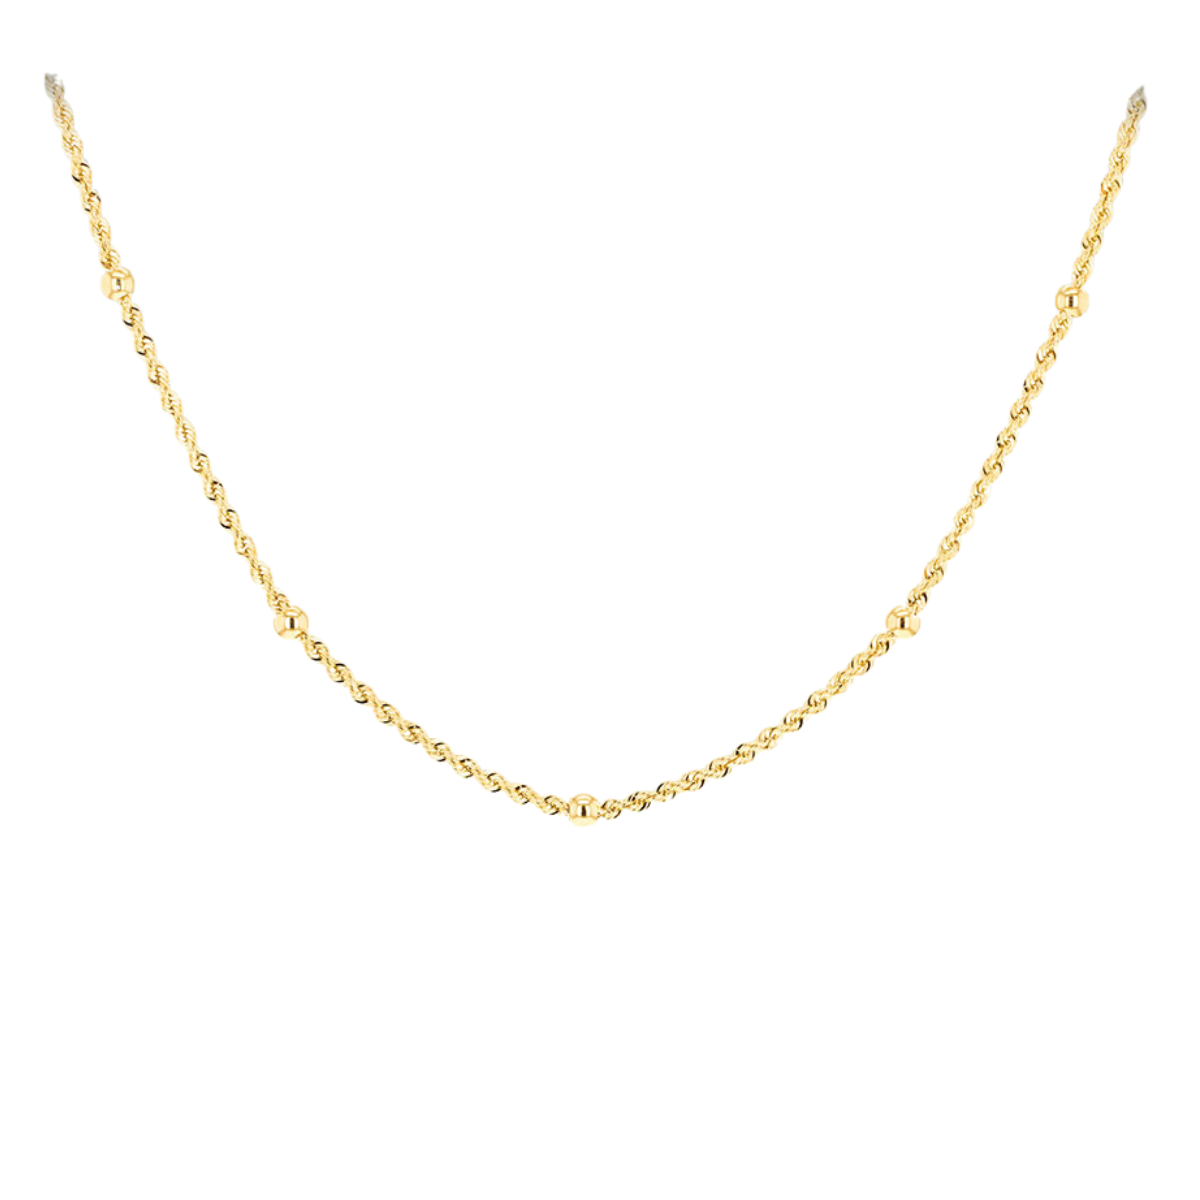 9ct Yellow Gold Rope and Balls Chain Necklace - Timeless Sophistication